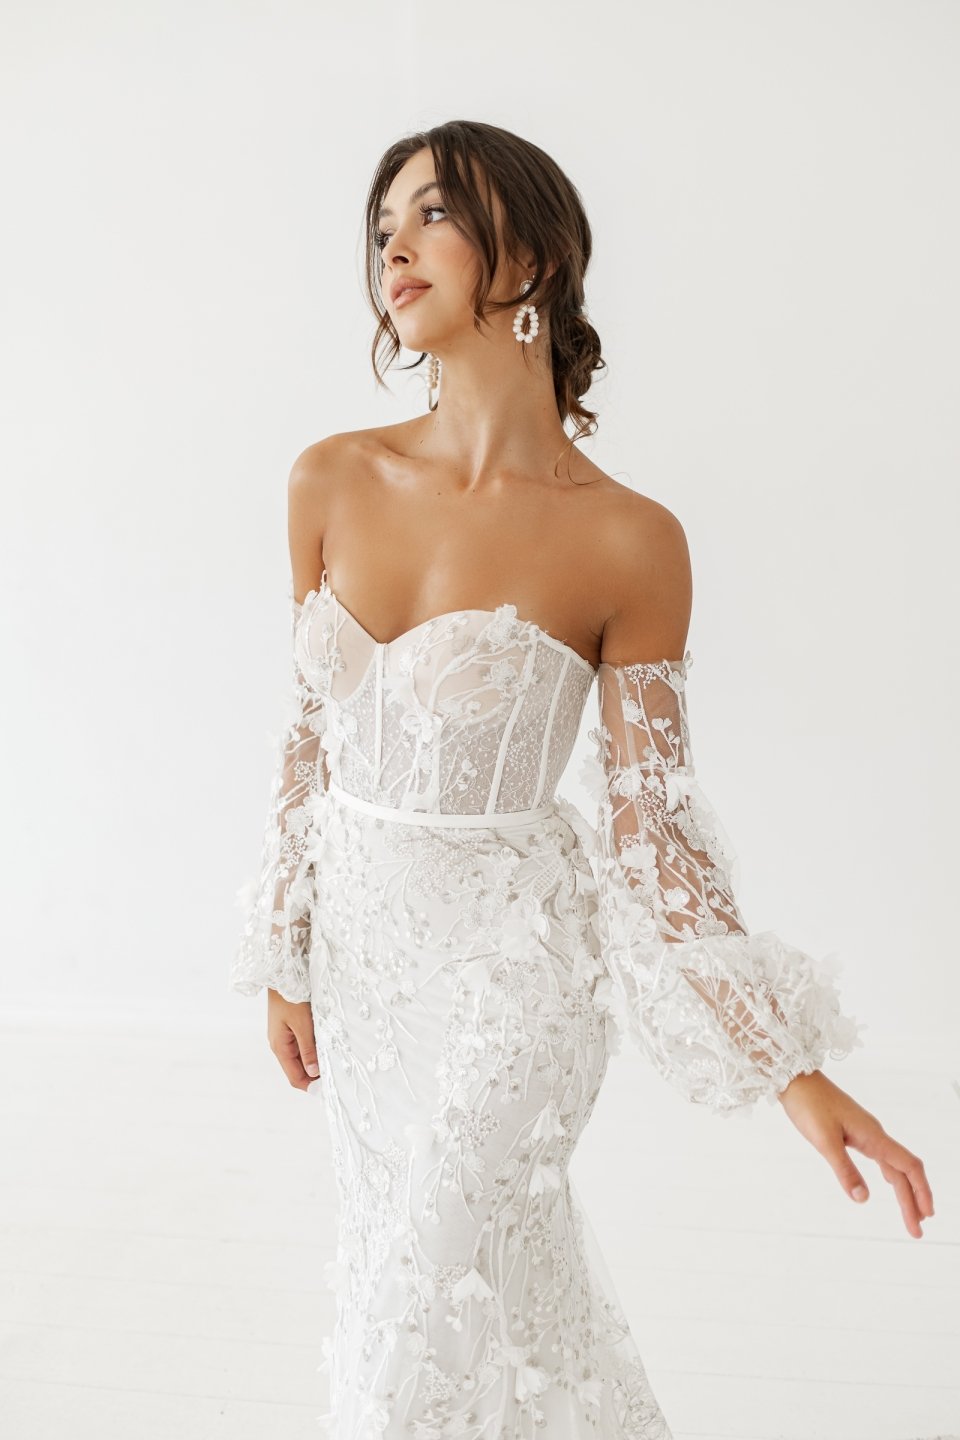 blanc-de-blanc-bridal-boutique-pittsburgh-cleveland-dress-wedding-gown-CUPID_BALLOON SLEEVES_Cherie-by-oui.jpeg